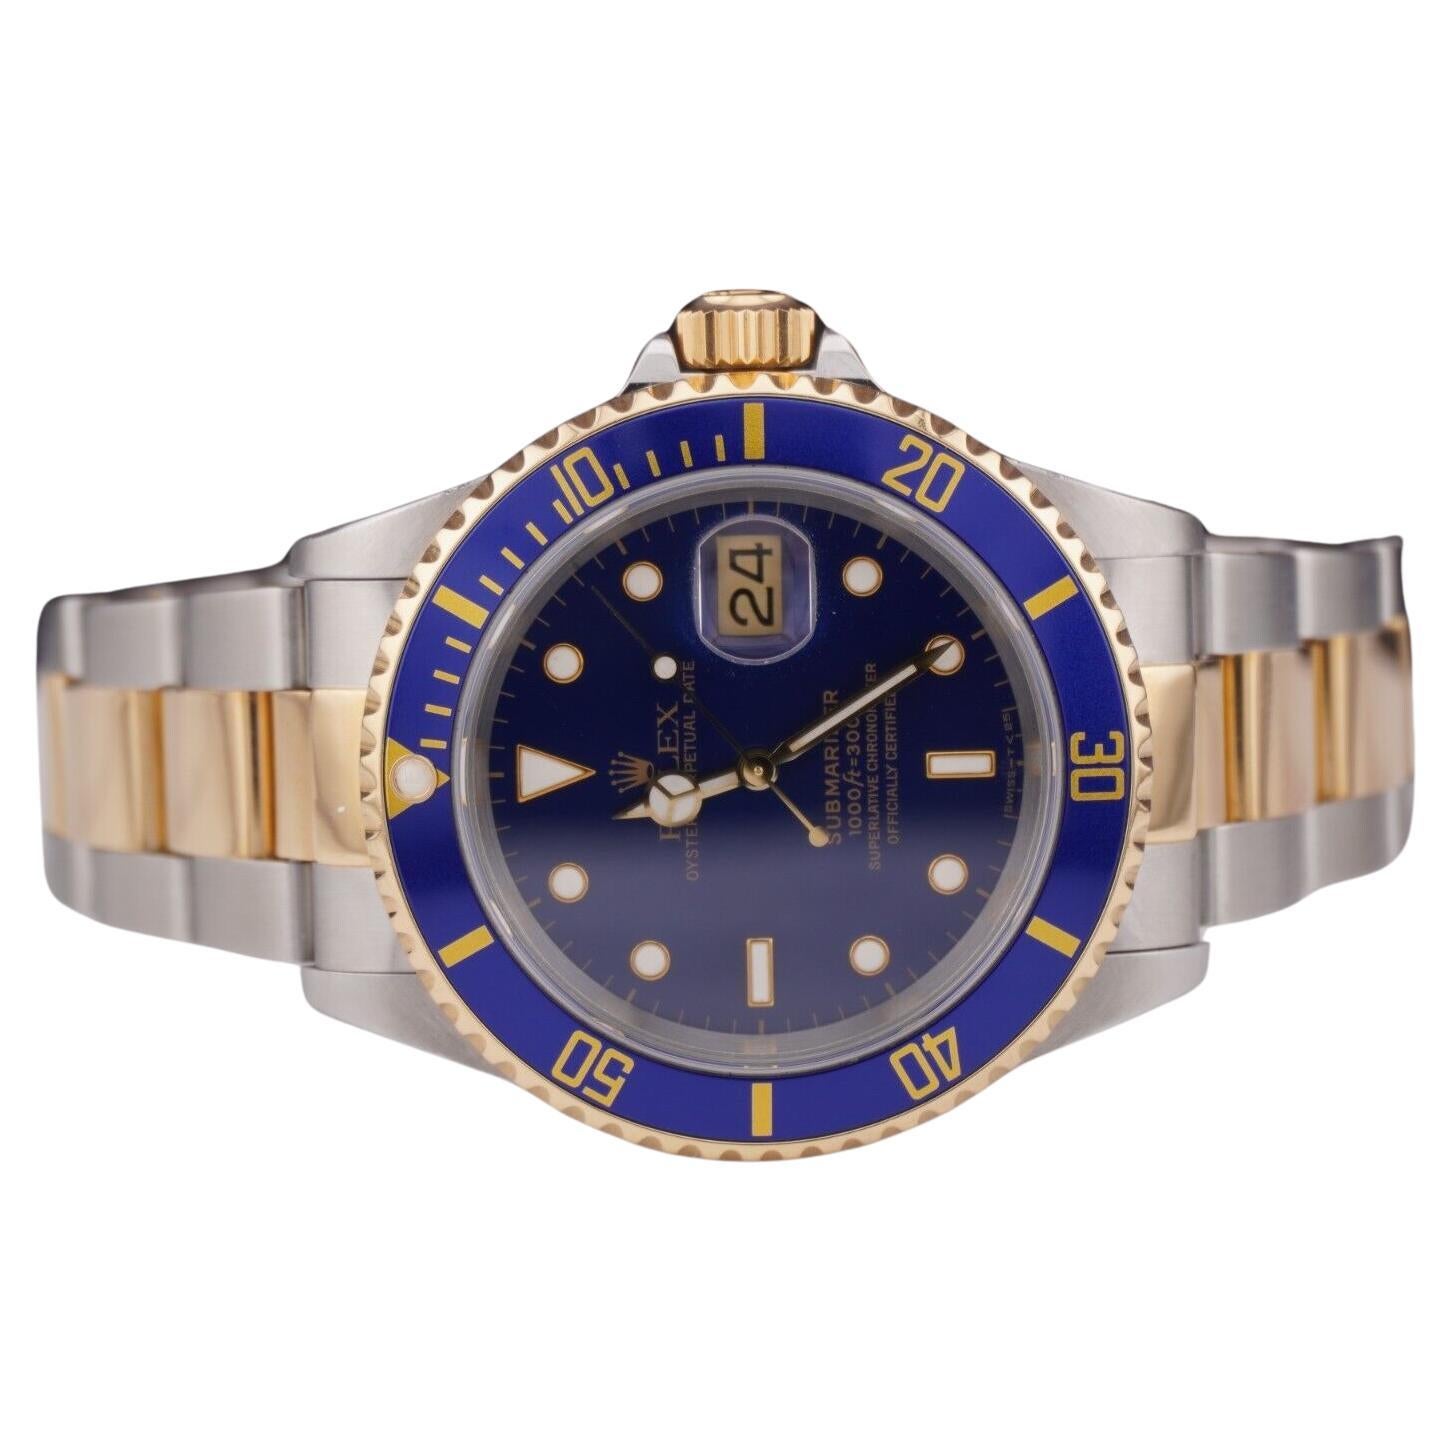 Rolex Submariner Date 40mm 18k Yellow Gold & Steel BLUE Dial Oyster Watch 16613